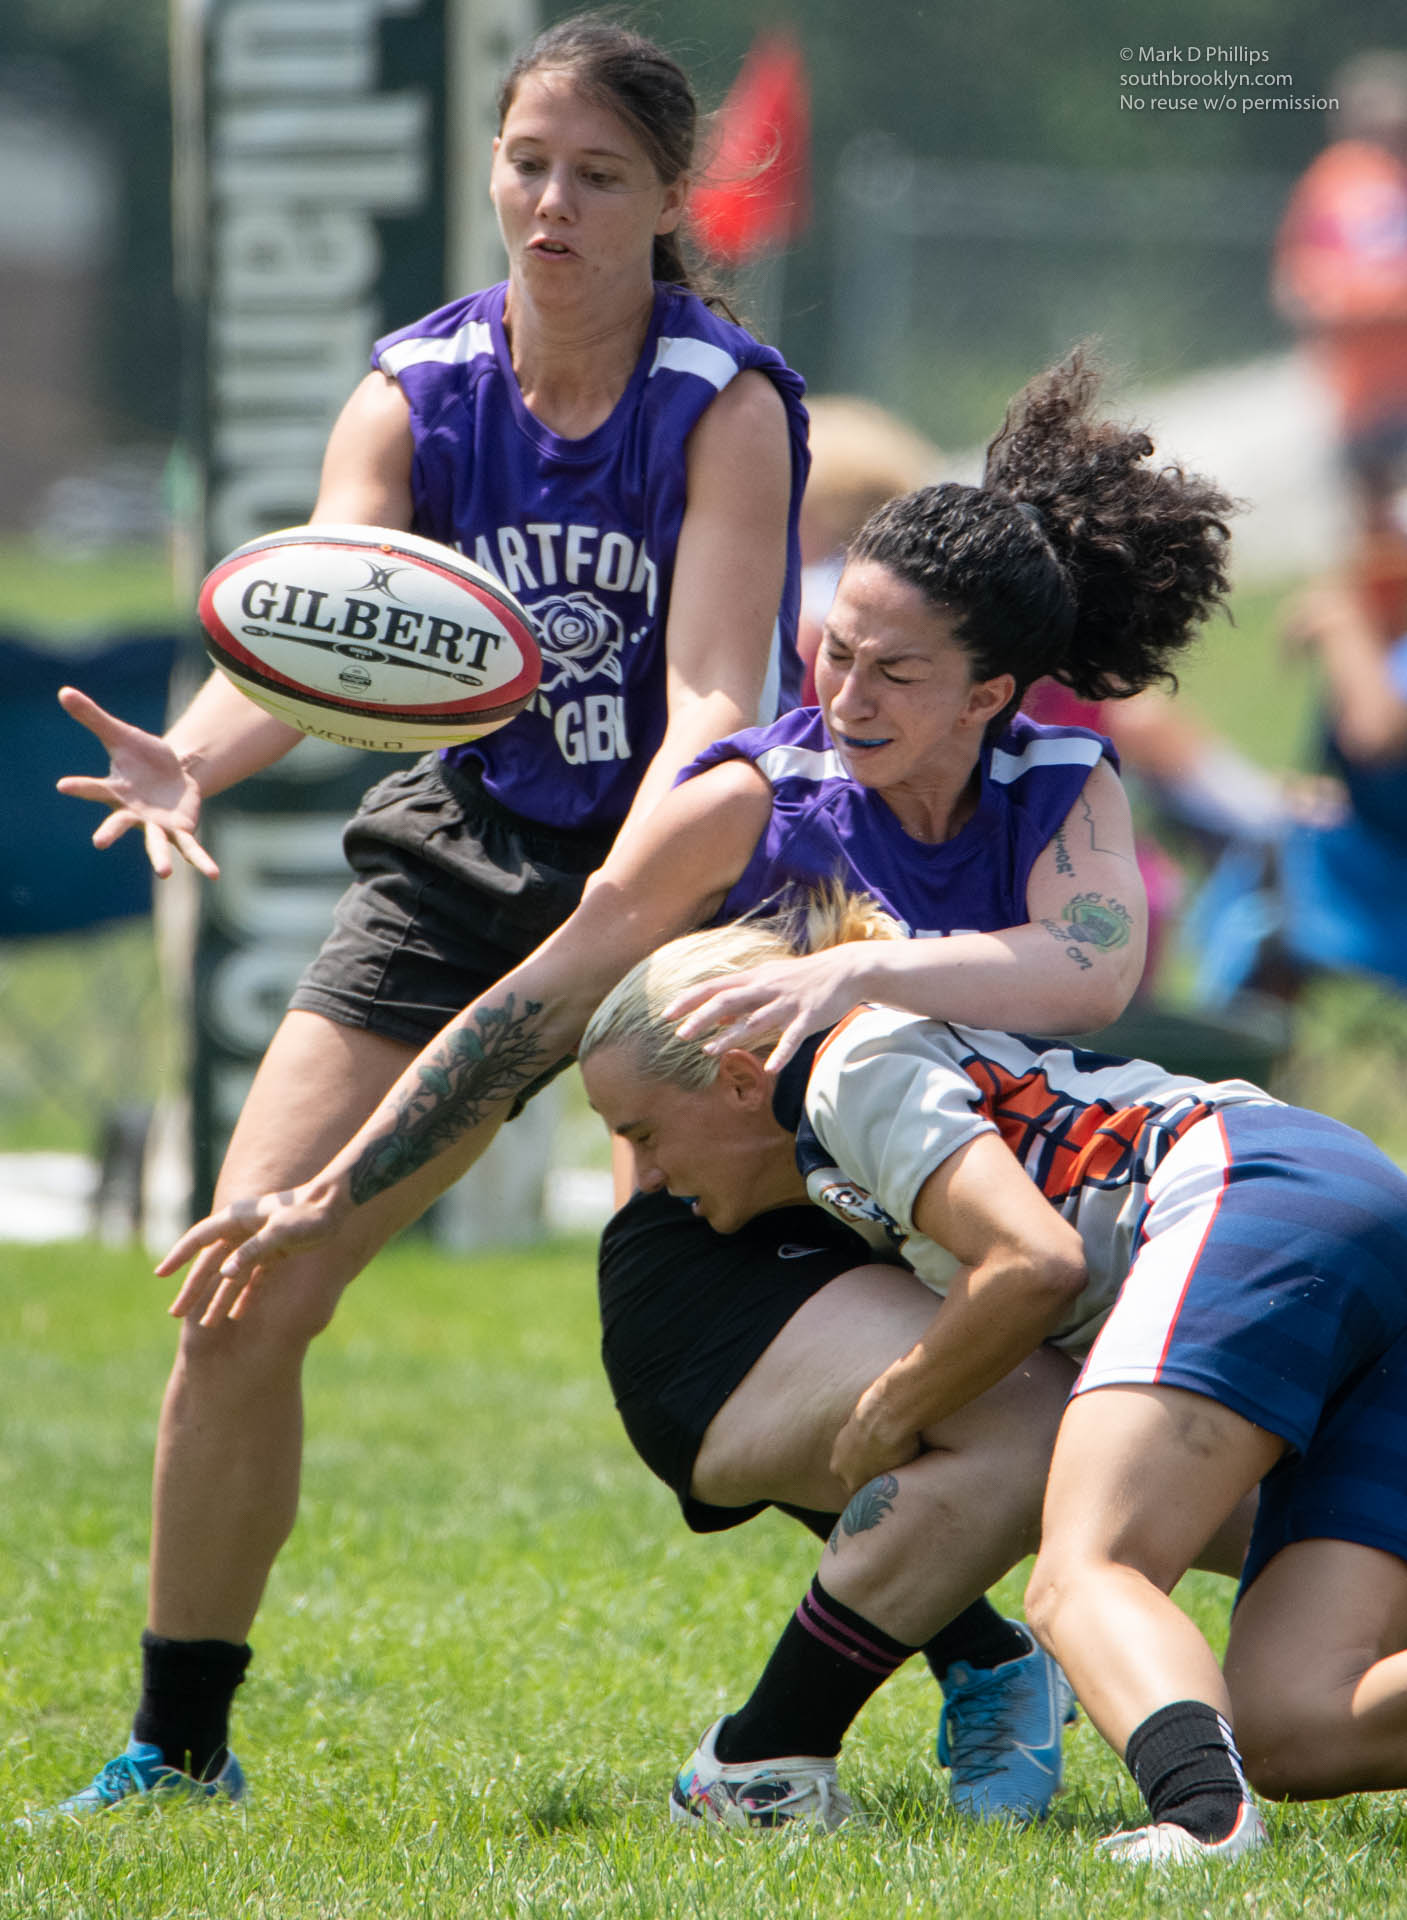 Hartford Roses Aliya Vandal loses the ball on a hard hit but her teammate, Kourtney Davis, is in the perfect position to recover at New Haven 7s tournament in Cheshire, CT, on July 17, 2021. ©Mark D Phillips